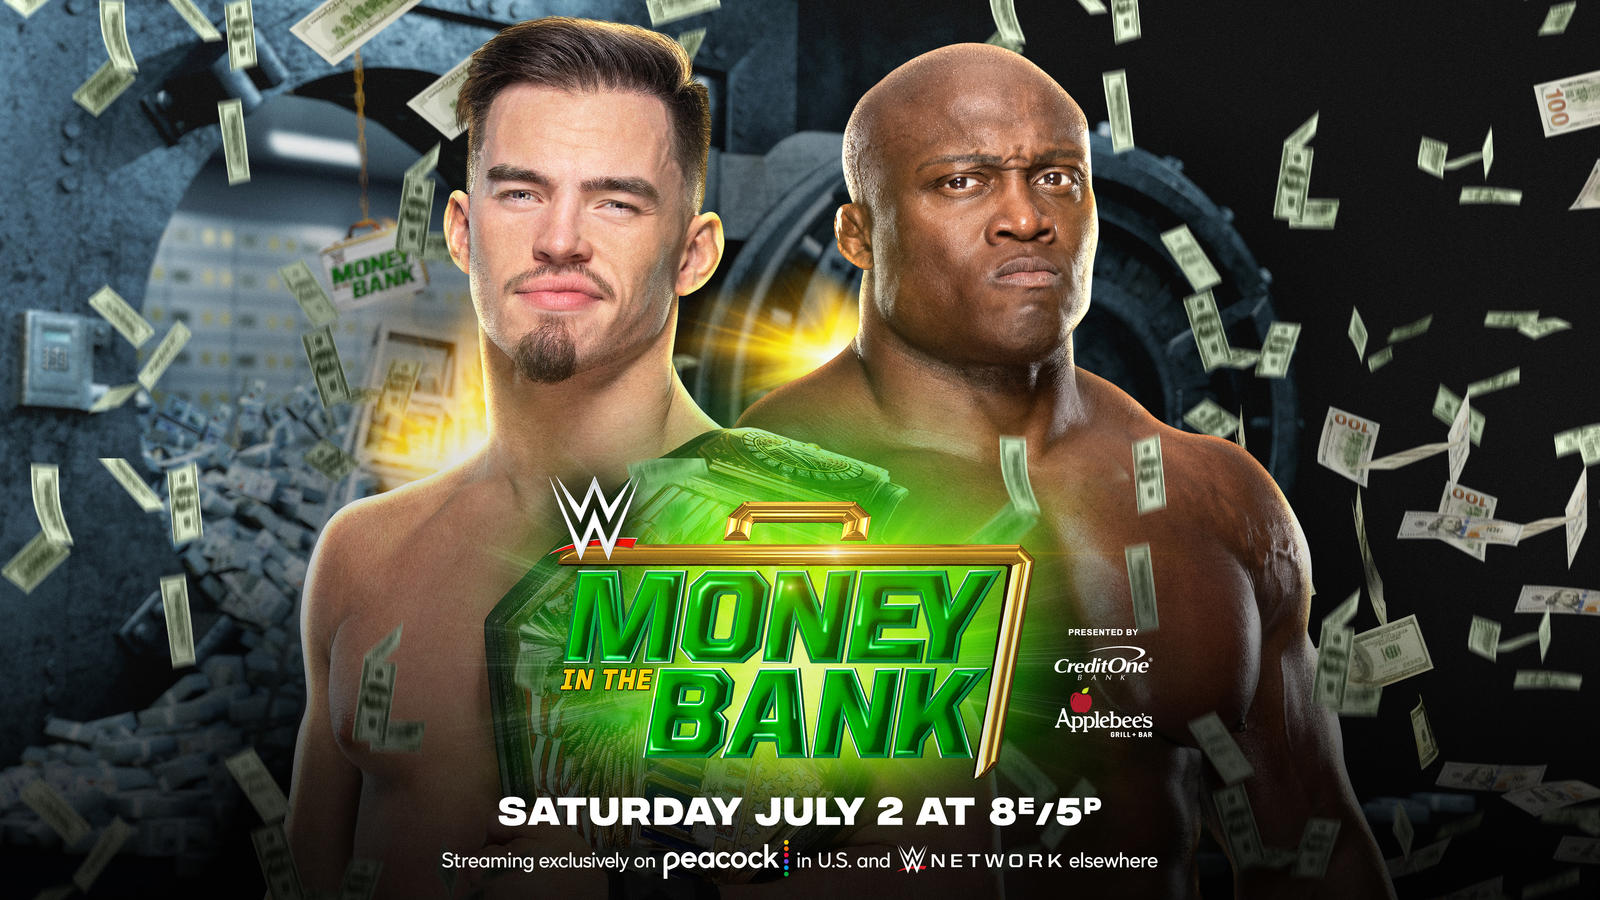 Dave Meltzer Star Ratings - WWE Money in the Bank 2022